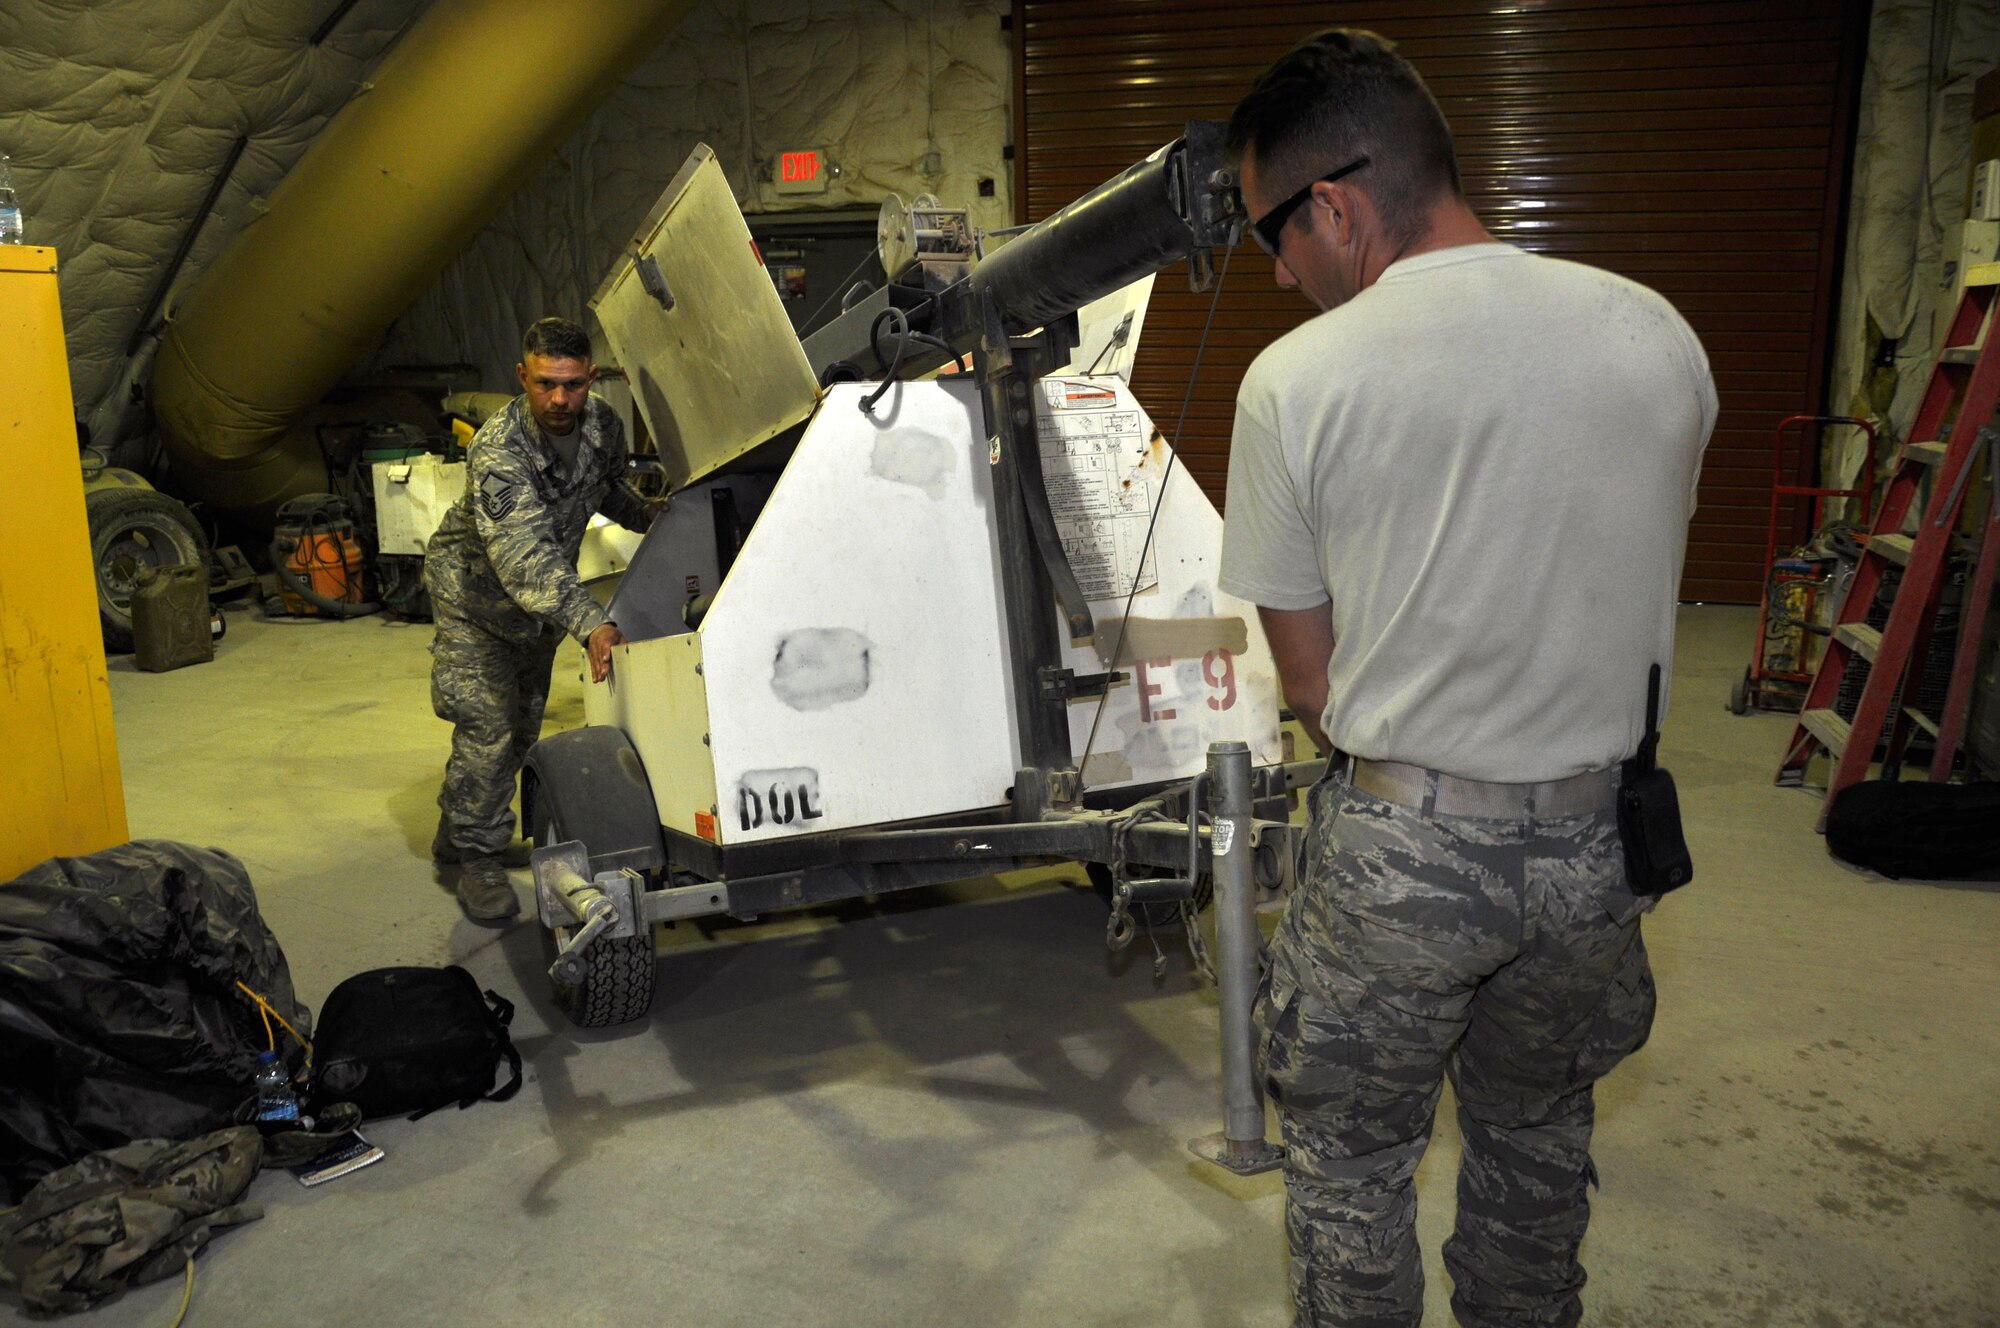 Staff Sgt. Jordan Lemay and Master Sgt. Daniel Romine, 386th Expeditionary Civil Engineer Squadron light cart team members, move a light cart into the maintenance bay at the 386 ECES Power Production facility.  The Power Pro light cart mission provides night-time illumination to many critical missions on base. (U.S. Air Force photo/Master Sgt. Eric Sharman)